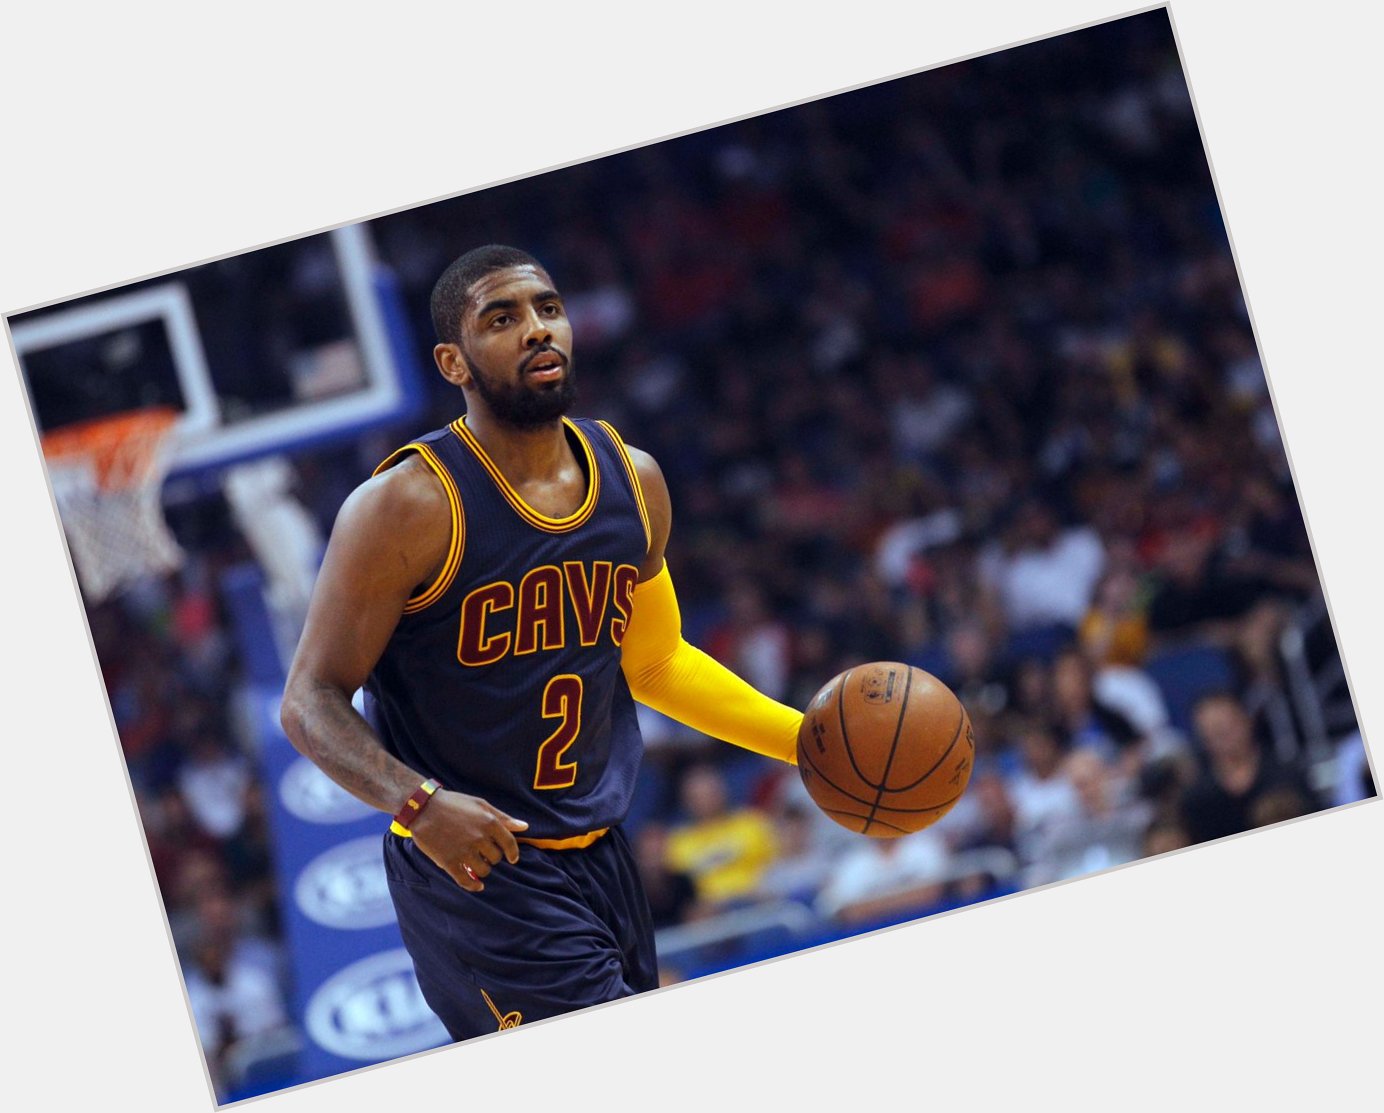 Happy Birthday to Kyrie Irving, who turns 25 today! 